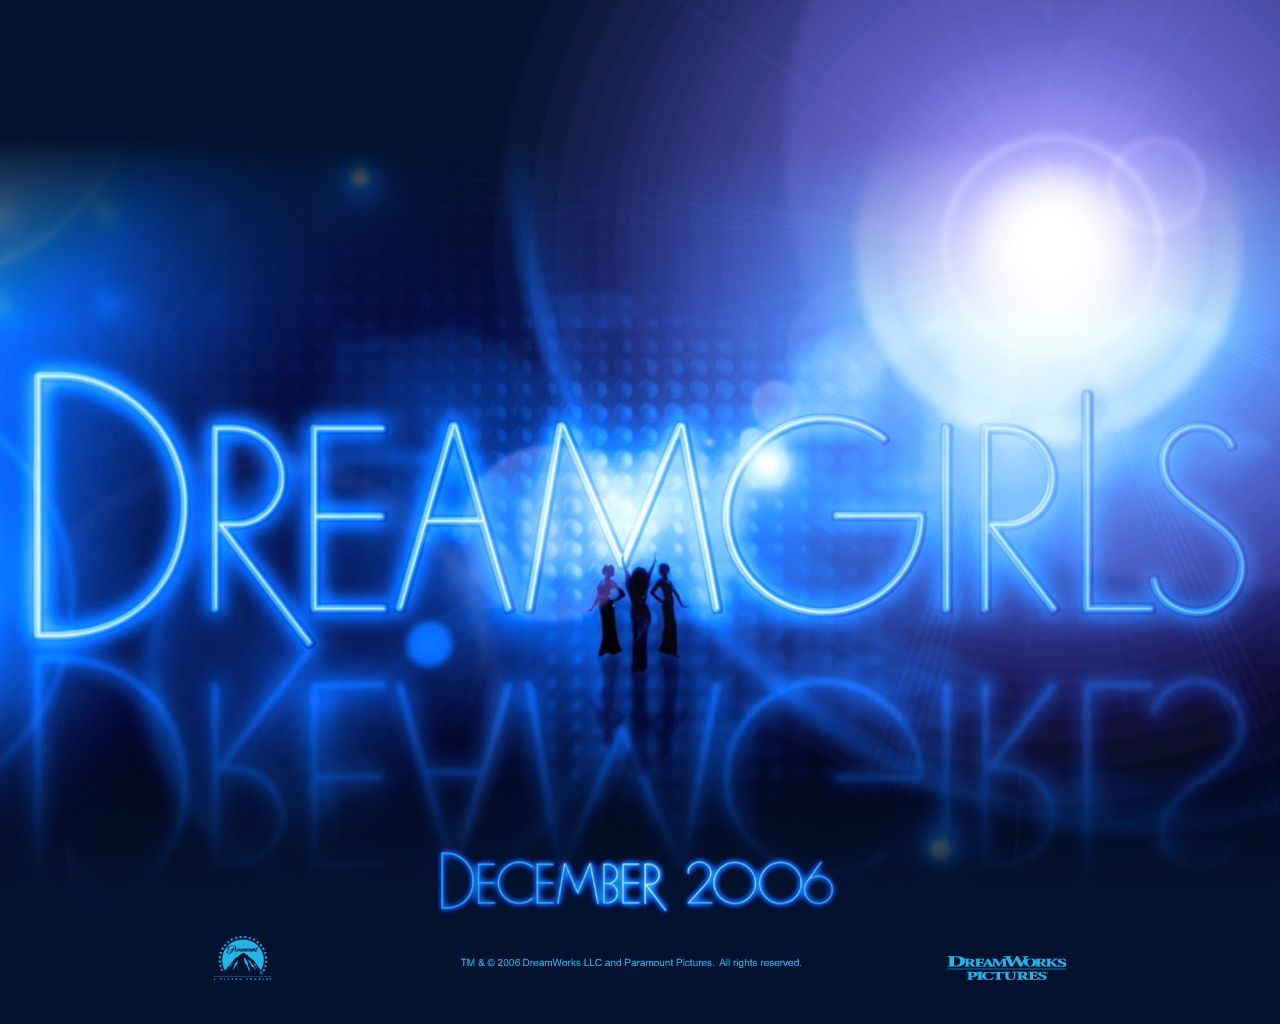 Dreamgirls Free Desktop Wallpapers for HD, Widescreen and Mobile